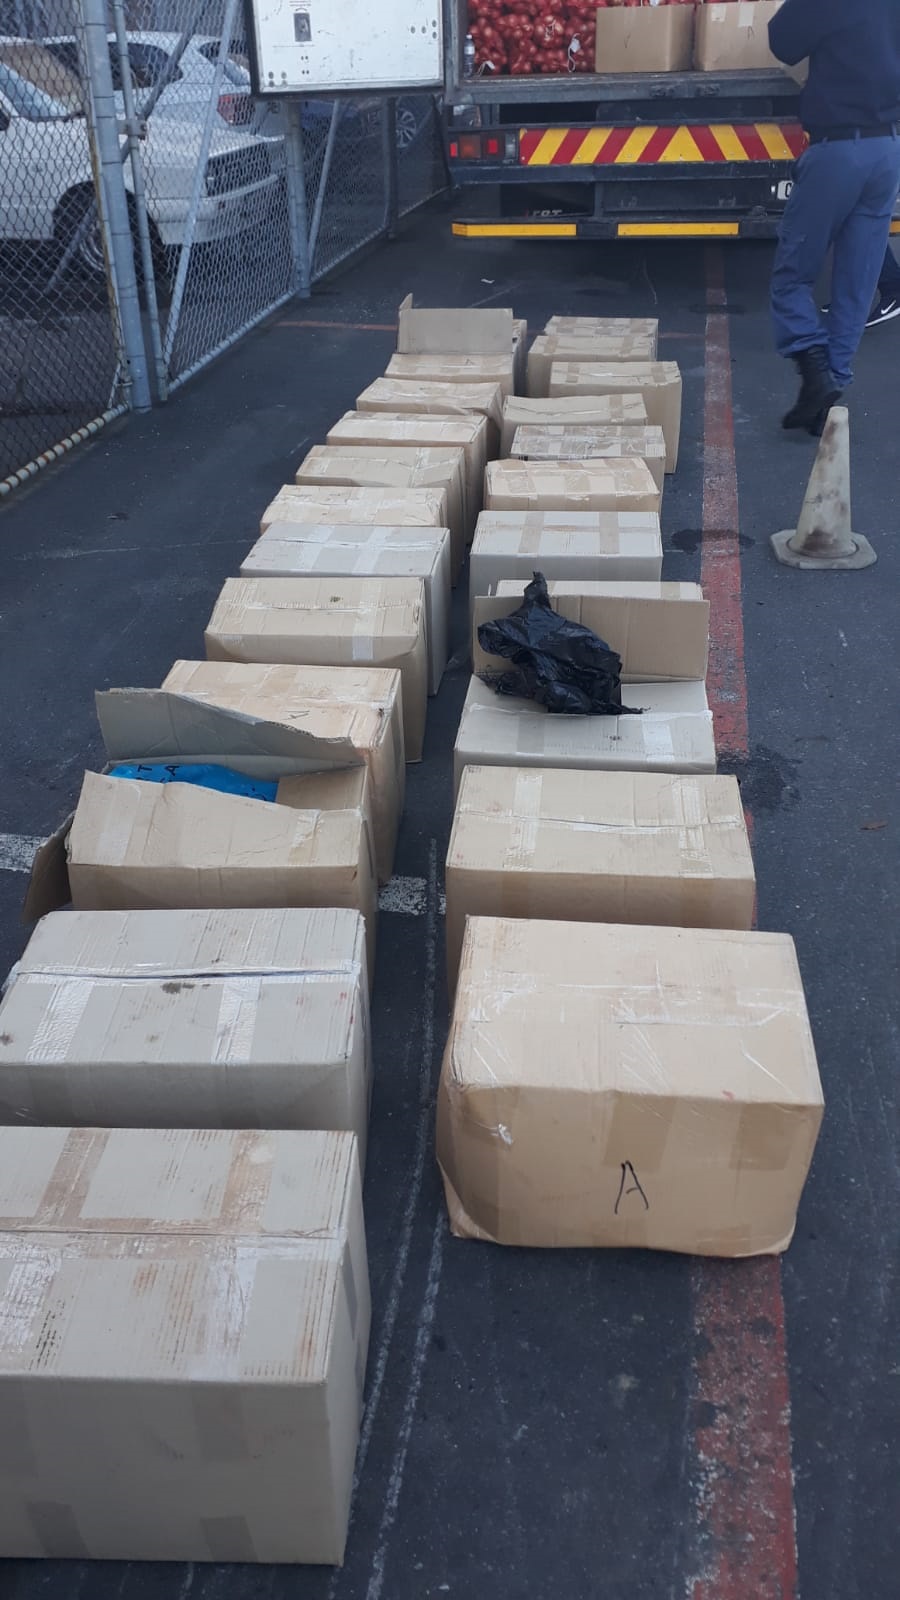 Two suspects arrested with abalone worth more than R5 million